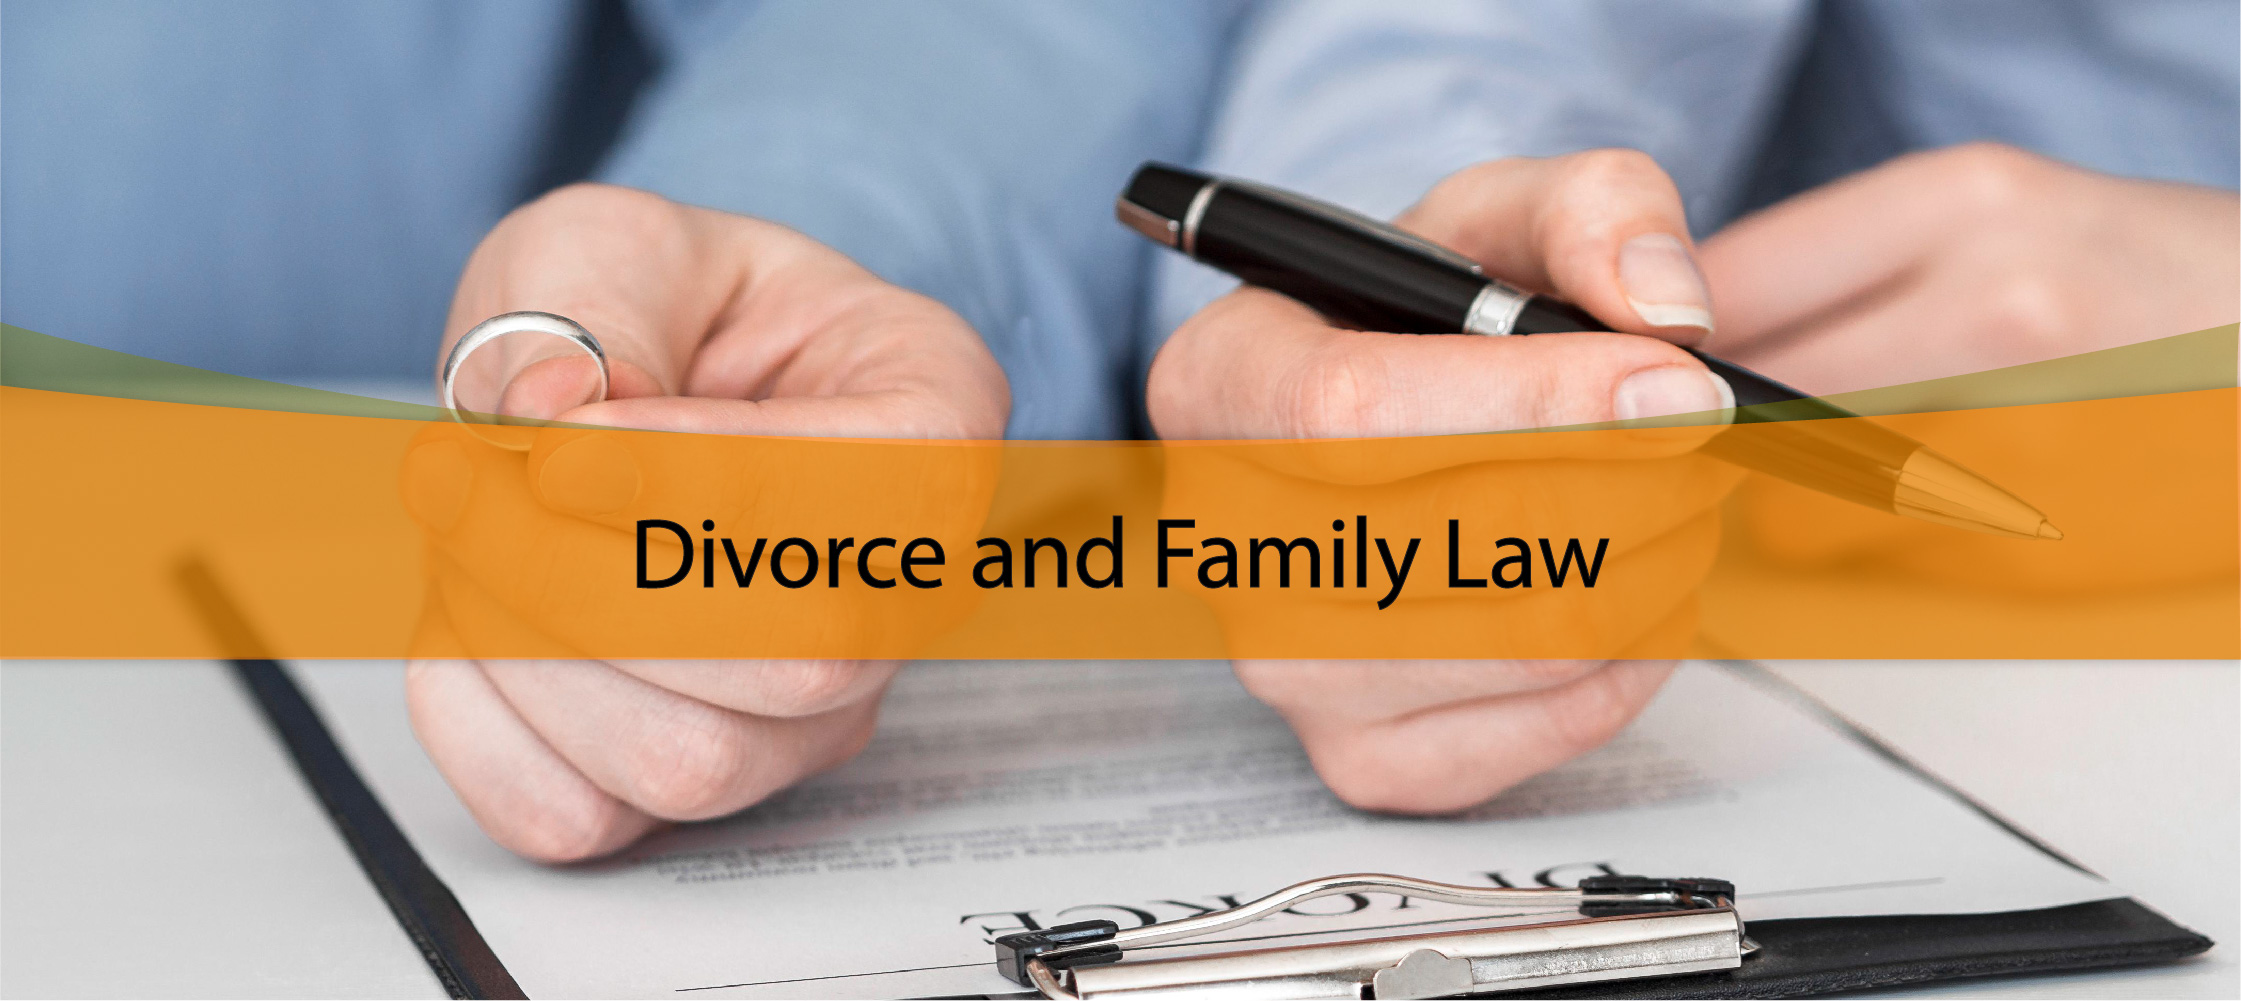 Divorce and Family Law Firm Names